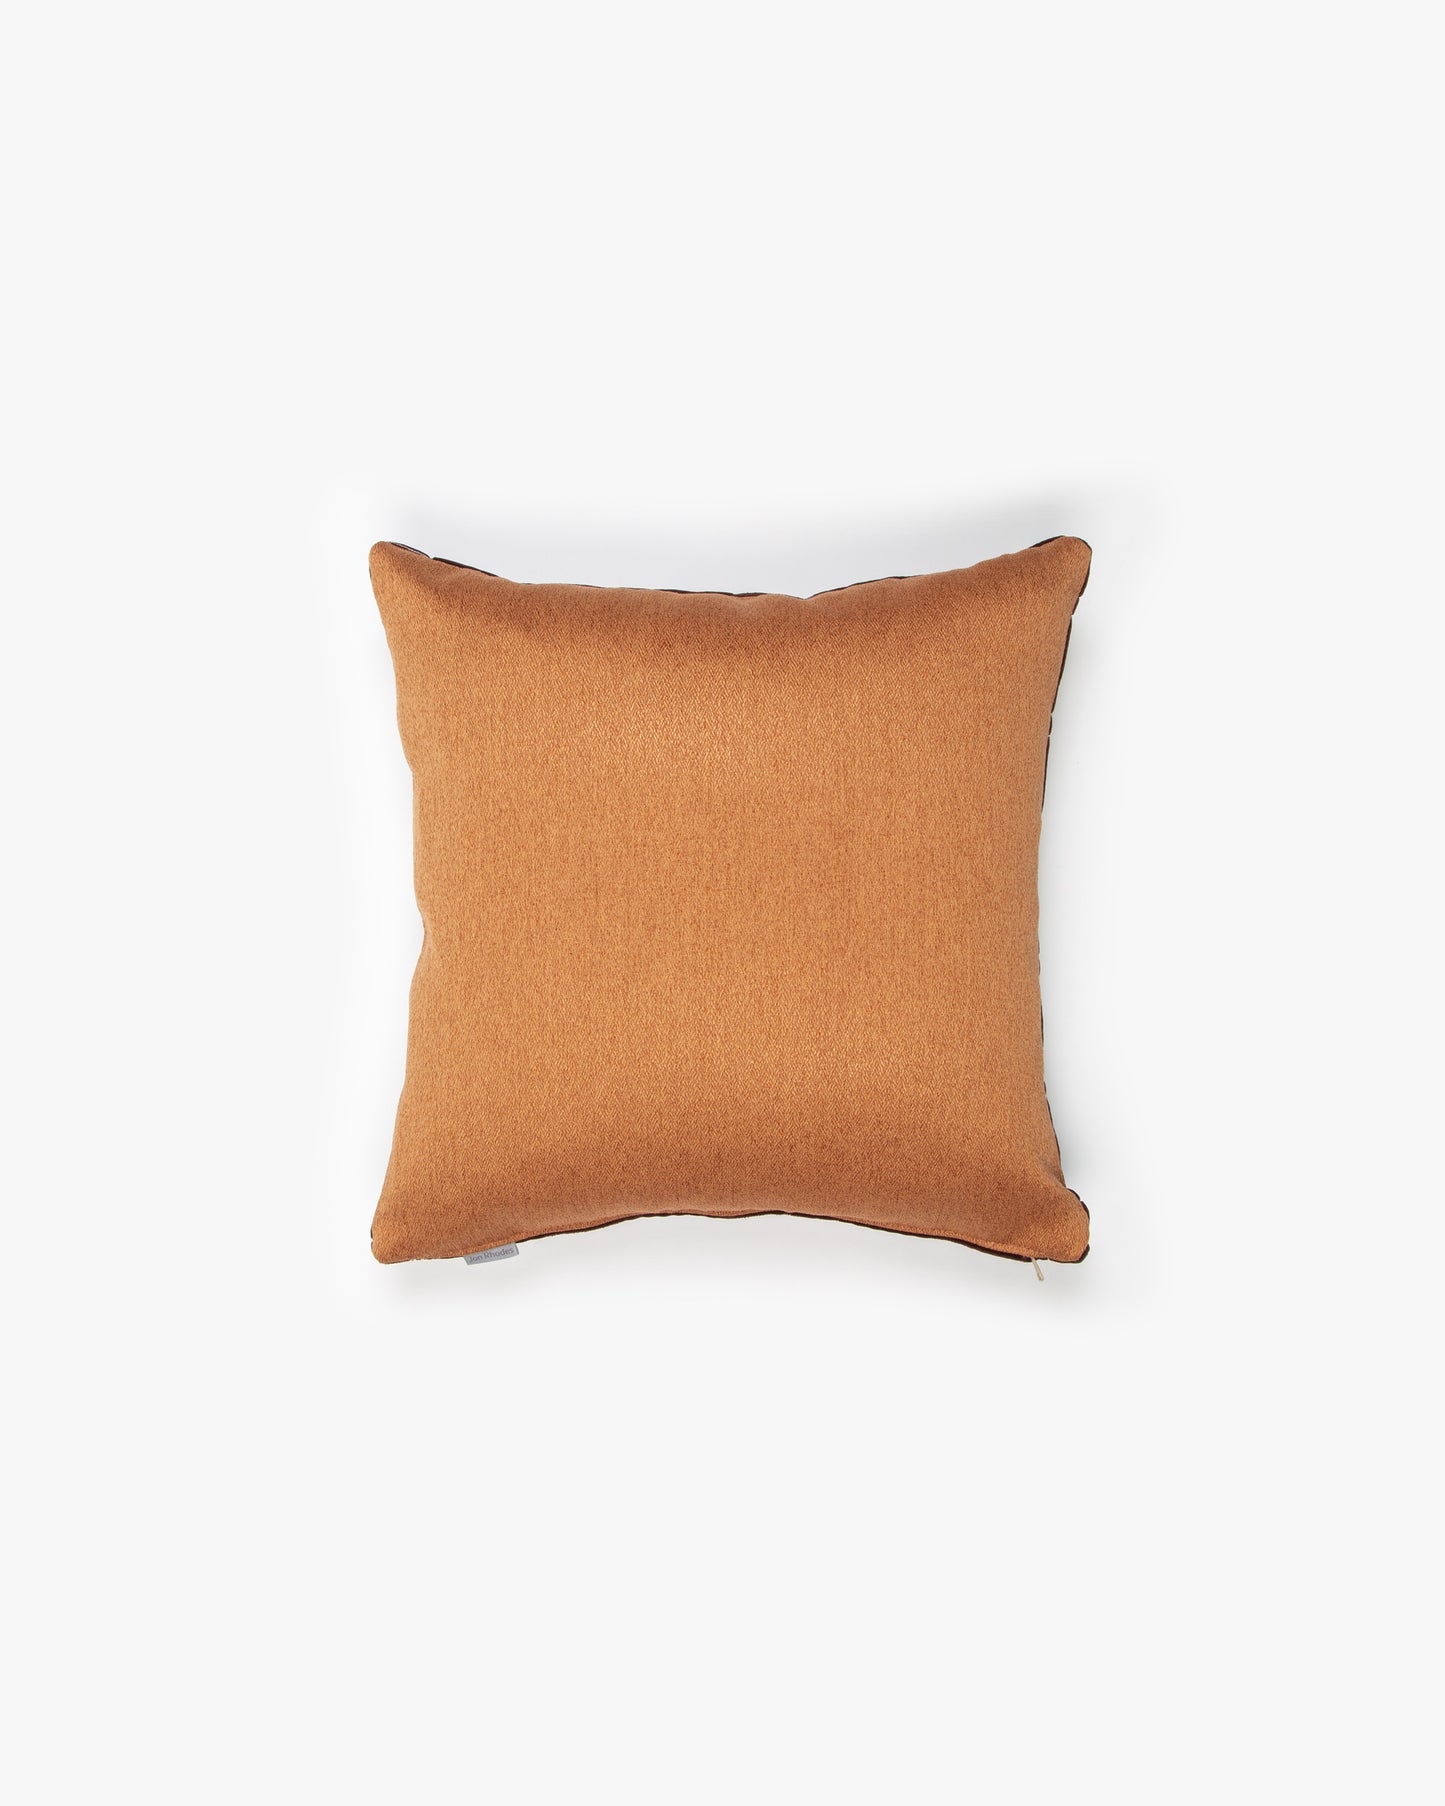 Brussels Cushion Cover